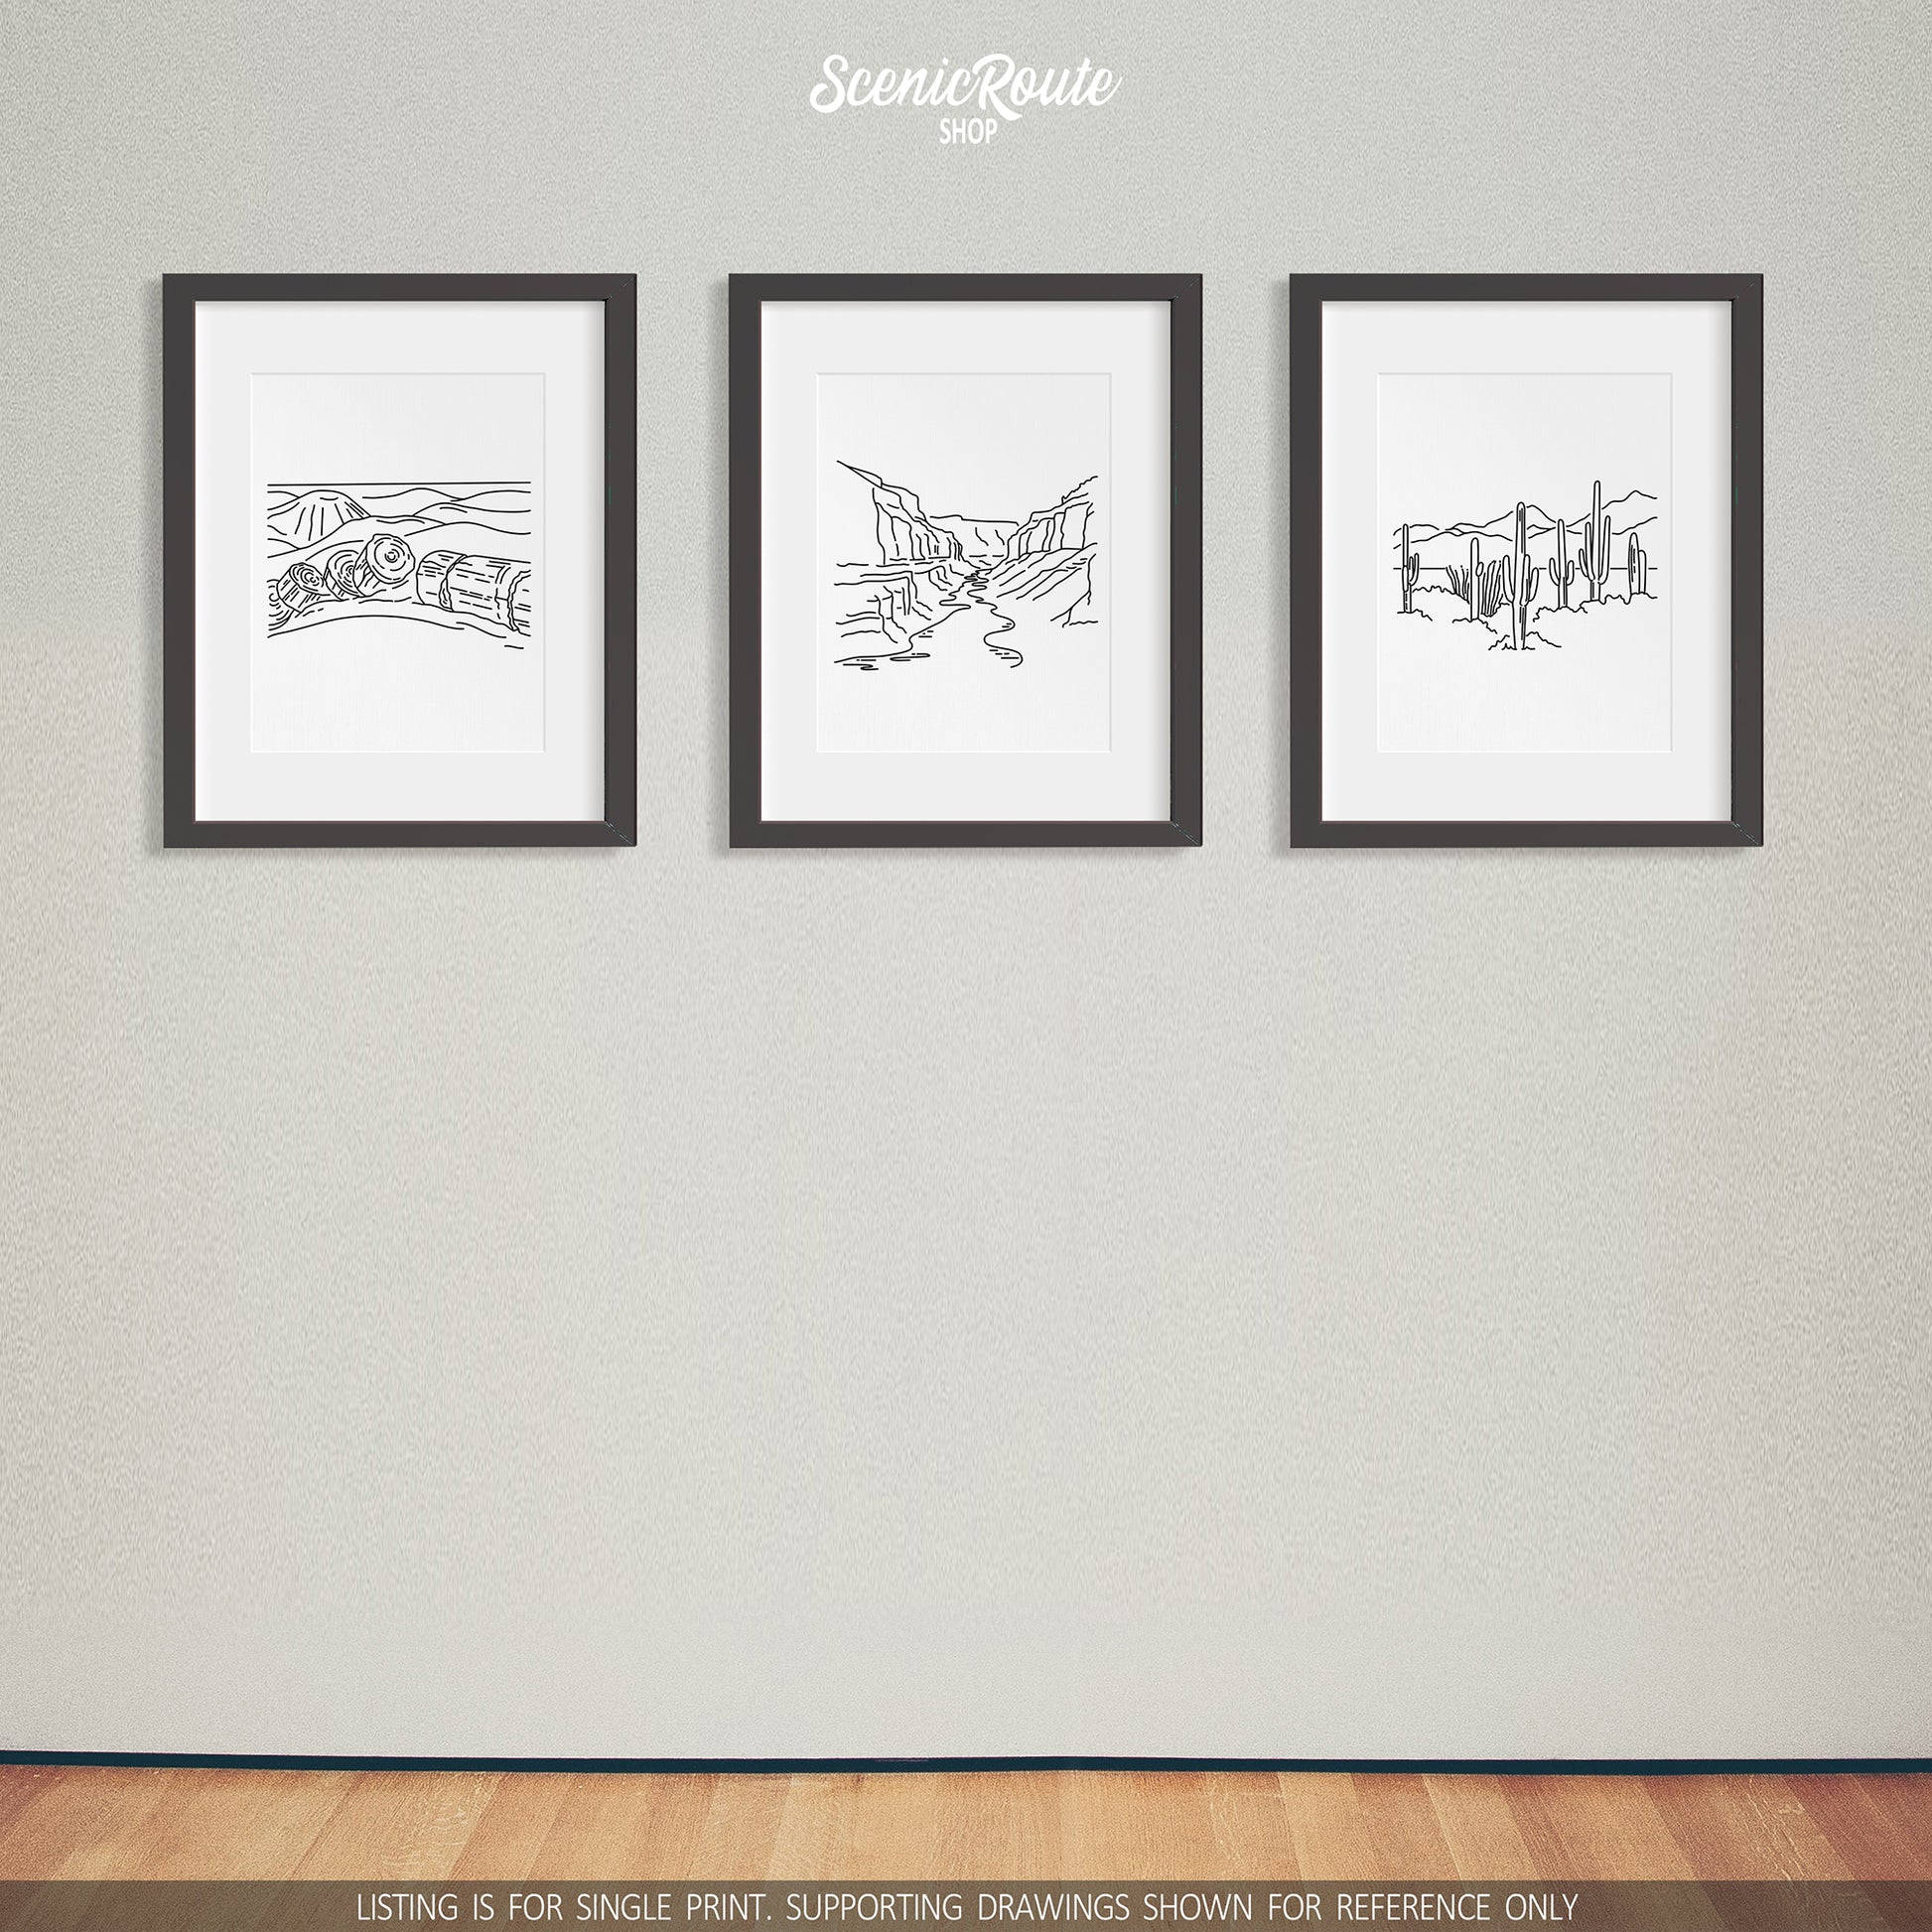 A group of three framed drawings on a white wall. The line art drawings include Petrified Forest National Park, Grand Canyon National Park, and Saguaro National Park